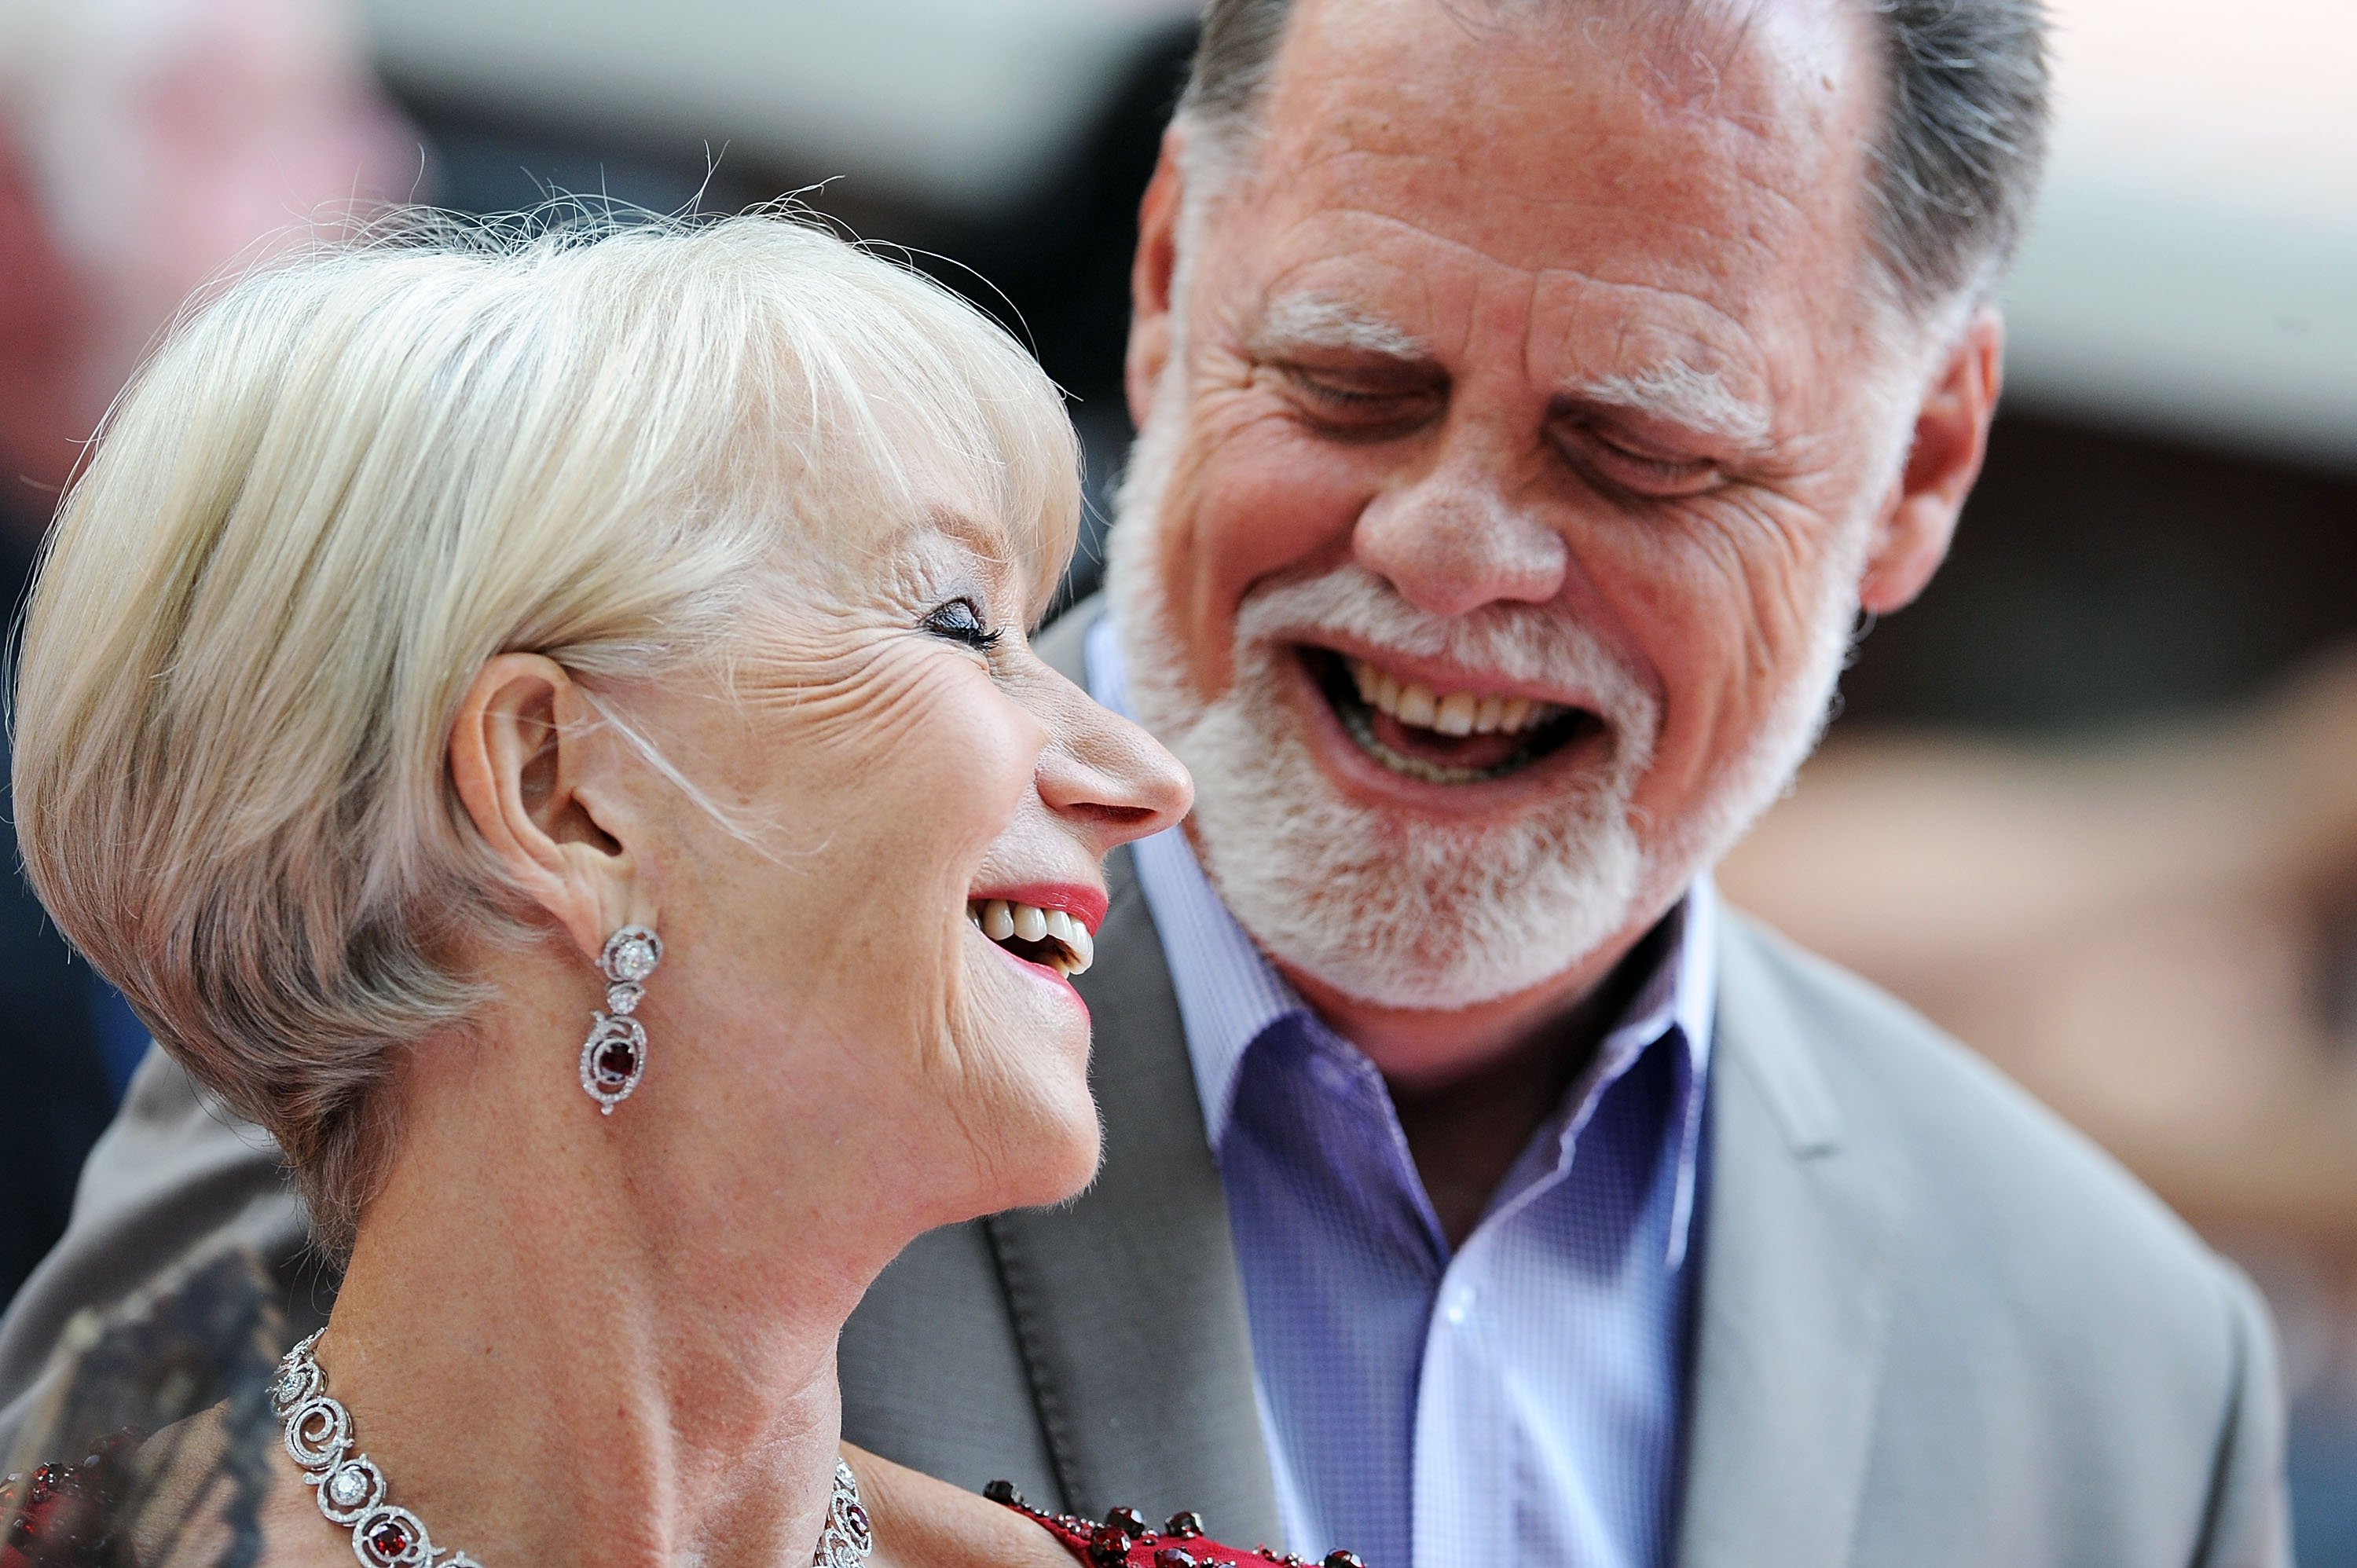 Helen Mirren and Taylor Hackford attend the European premiere of 'Red 2' at Empire Leicester Square on July 22, 2013 in London, England | Source: Getty Images